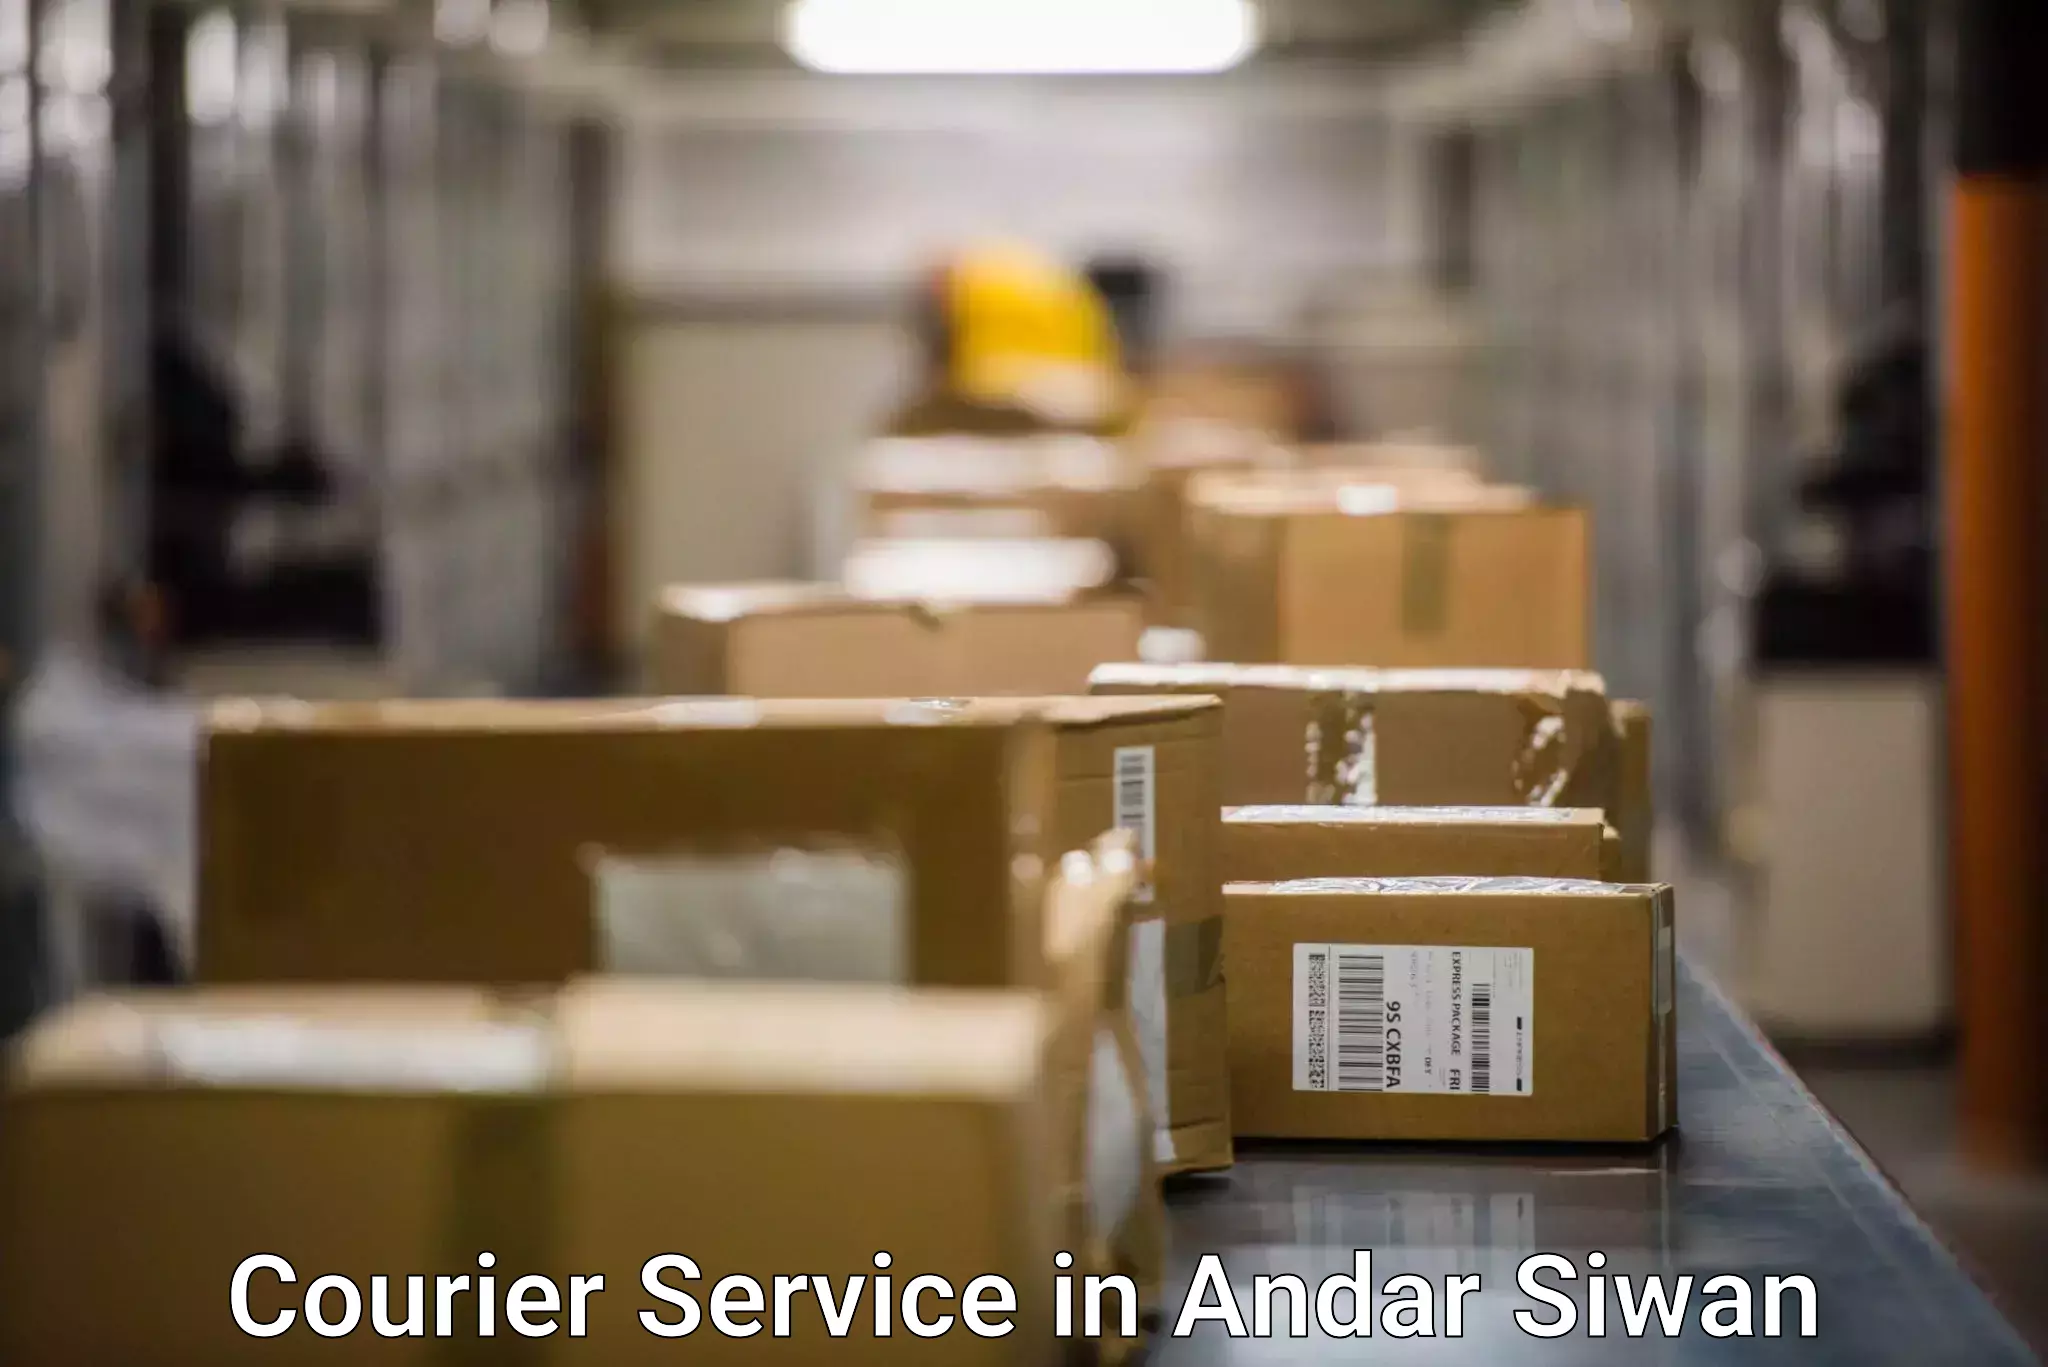 Express courier capabilities in Andar Siwan